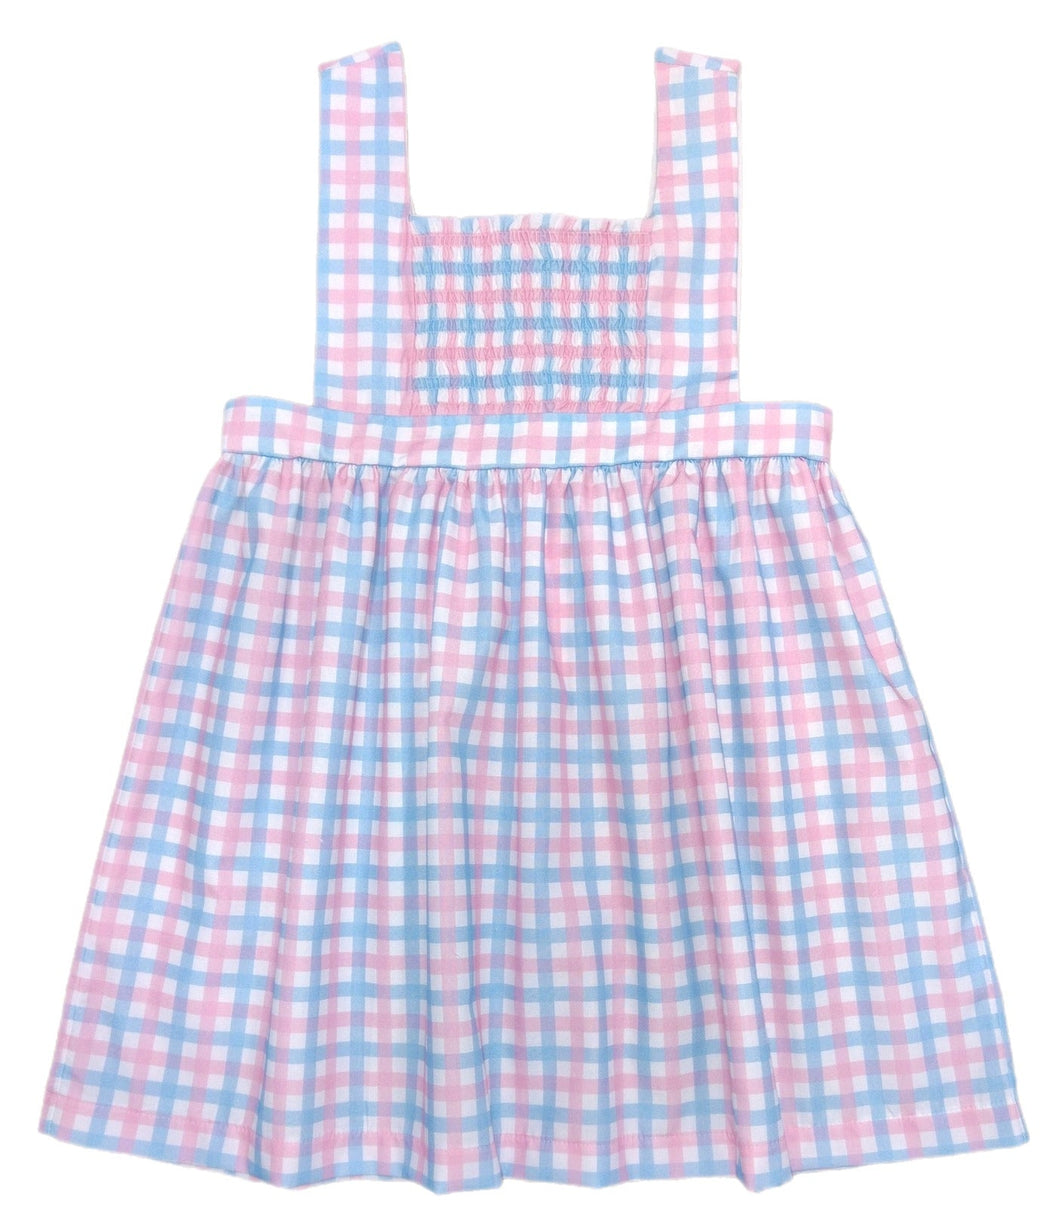 Sutton Smocked Dress, Pink and Blue Check